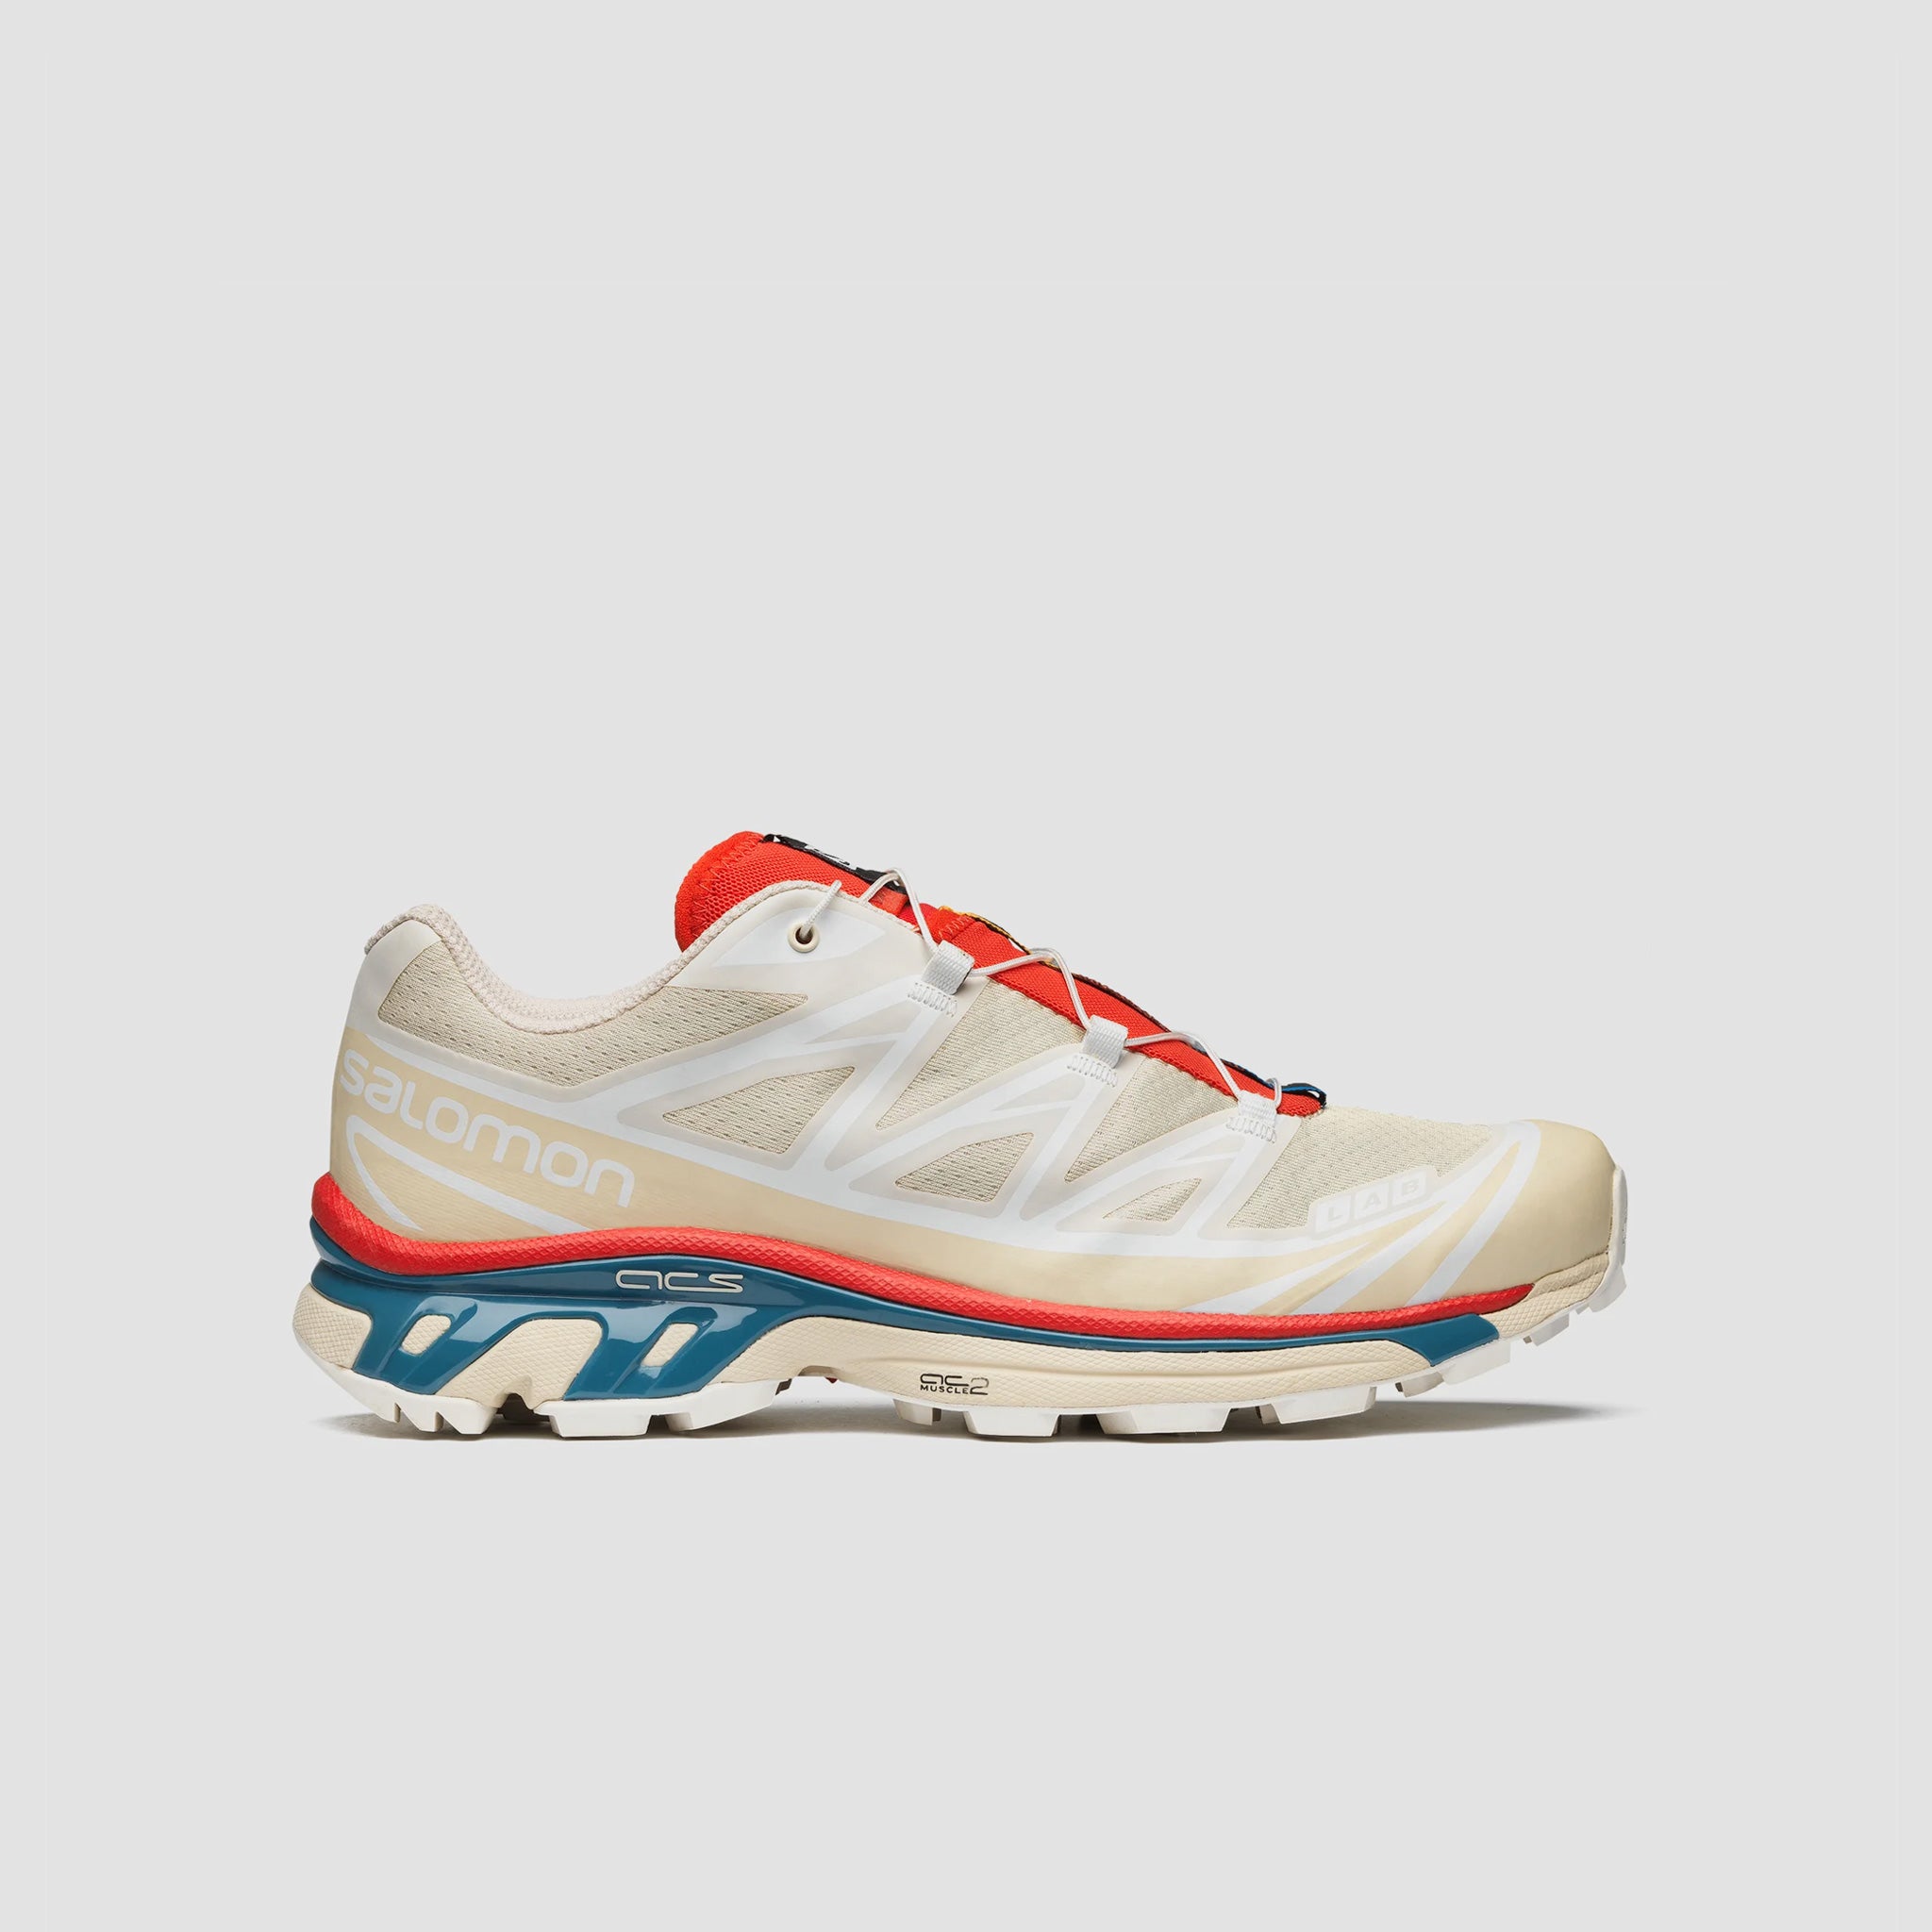 Off white XT-6 Salomon Sneakers with vibrant red and teal blue sole details, side view.